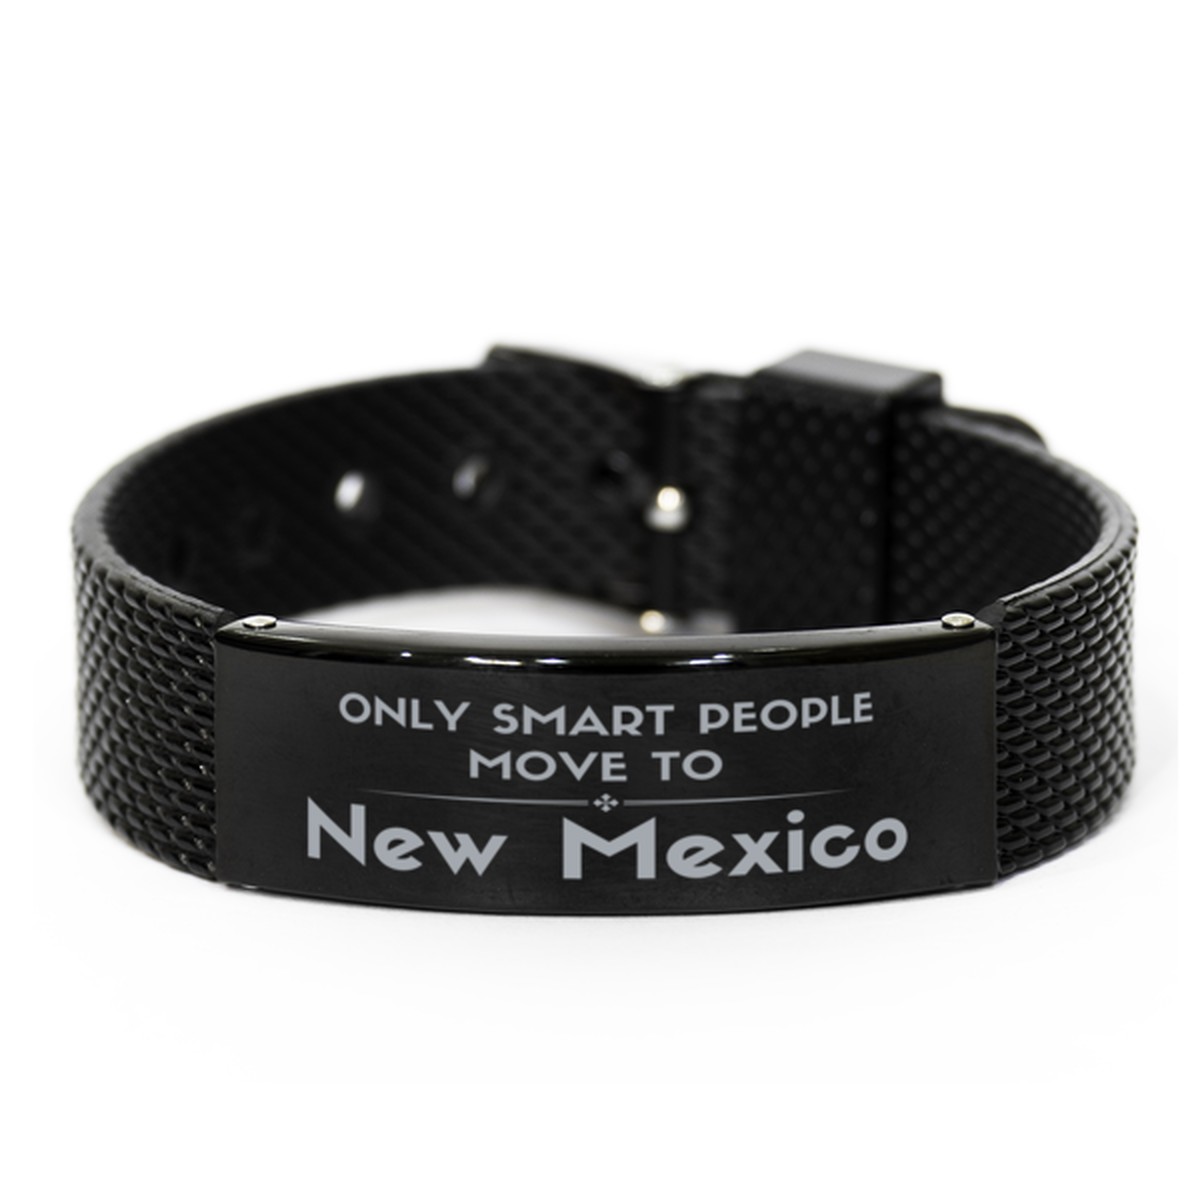 Only smart people move to New Mexico Black Shark Mesh Bracelet, Gag Gifts For New Mexico, Move to New Mexico Gifts for Friends Coworker Funny Saying Quote